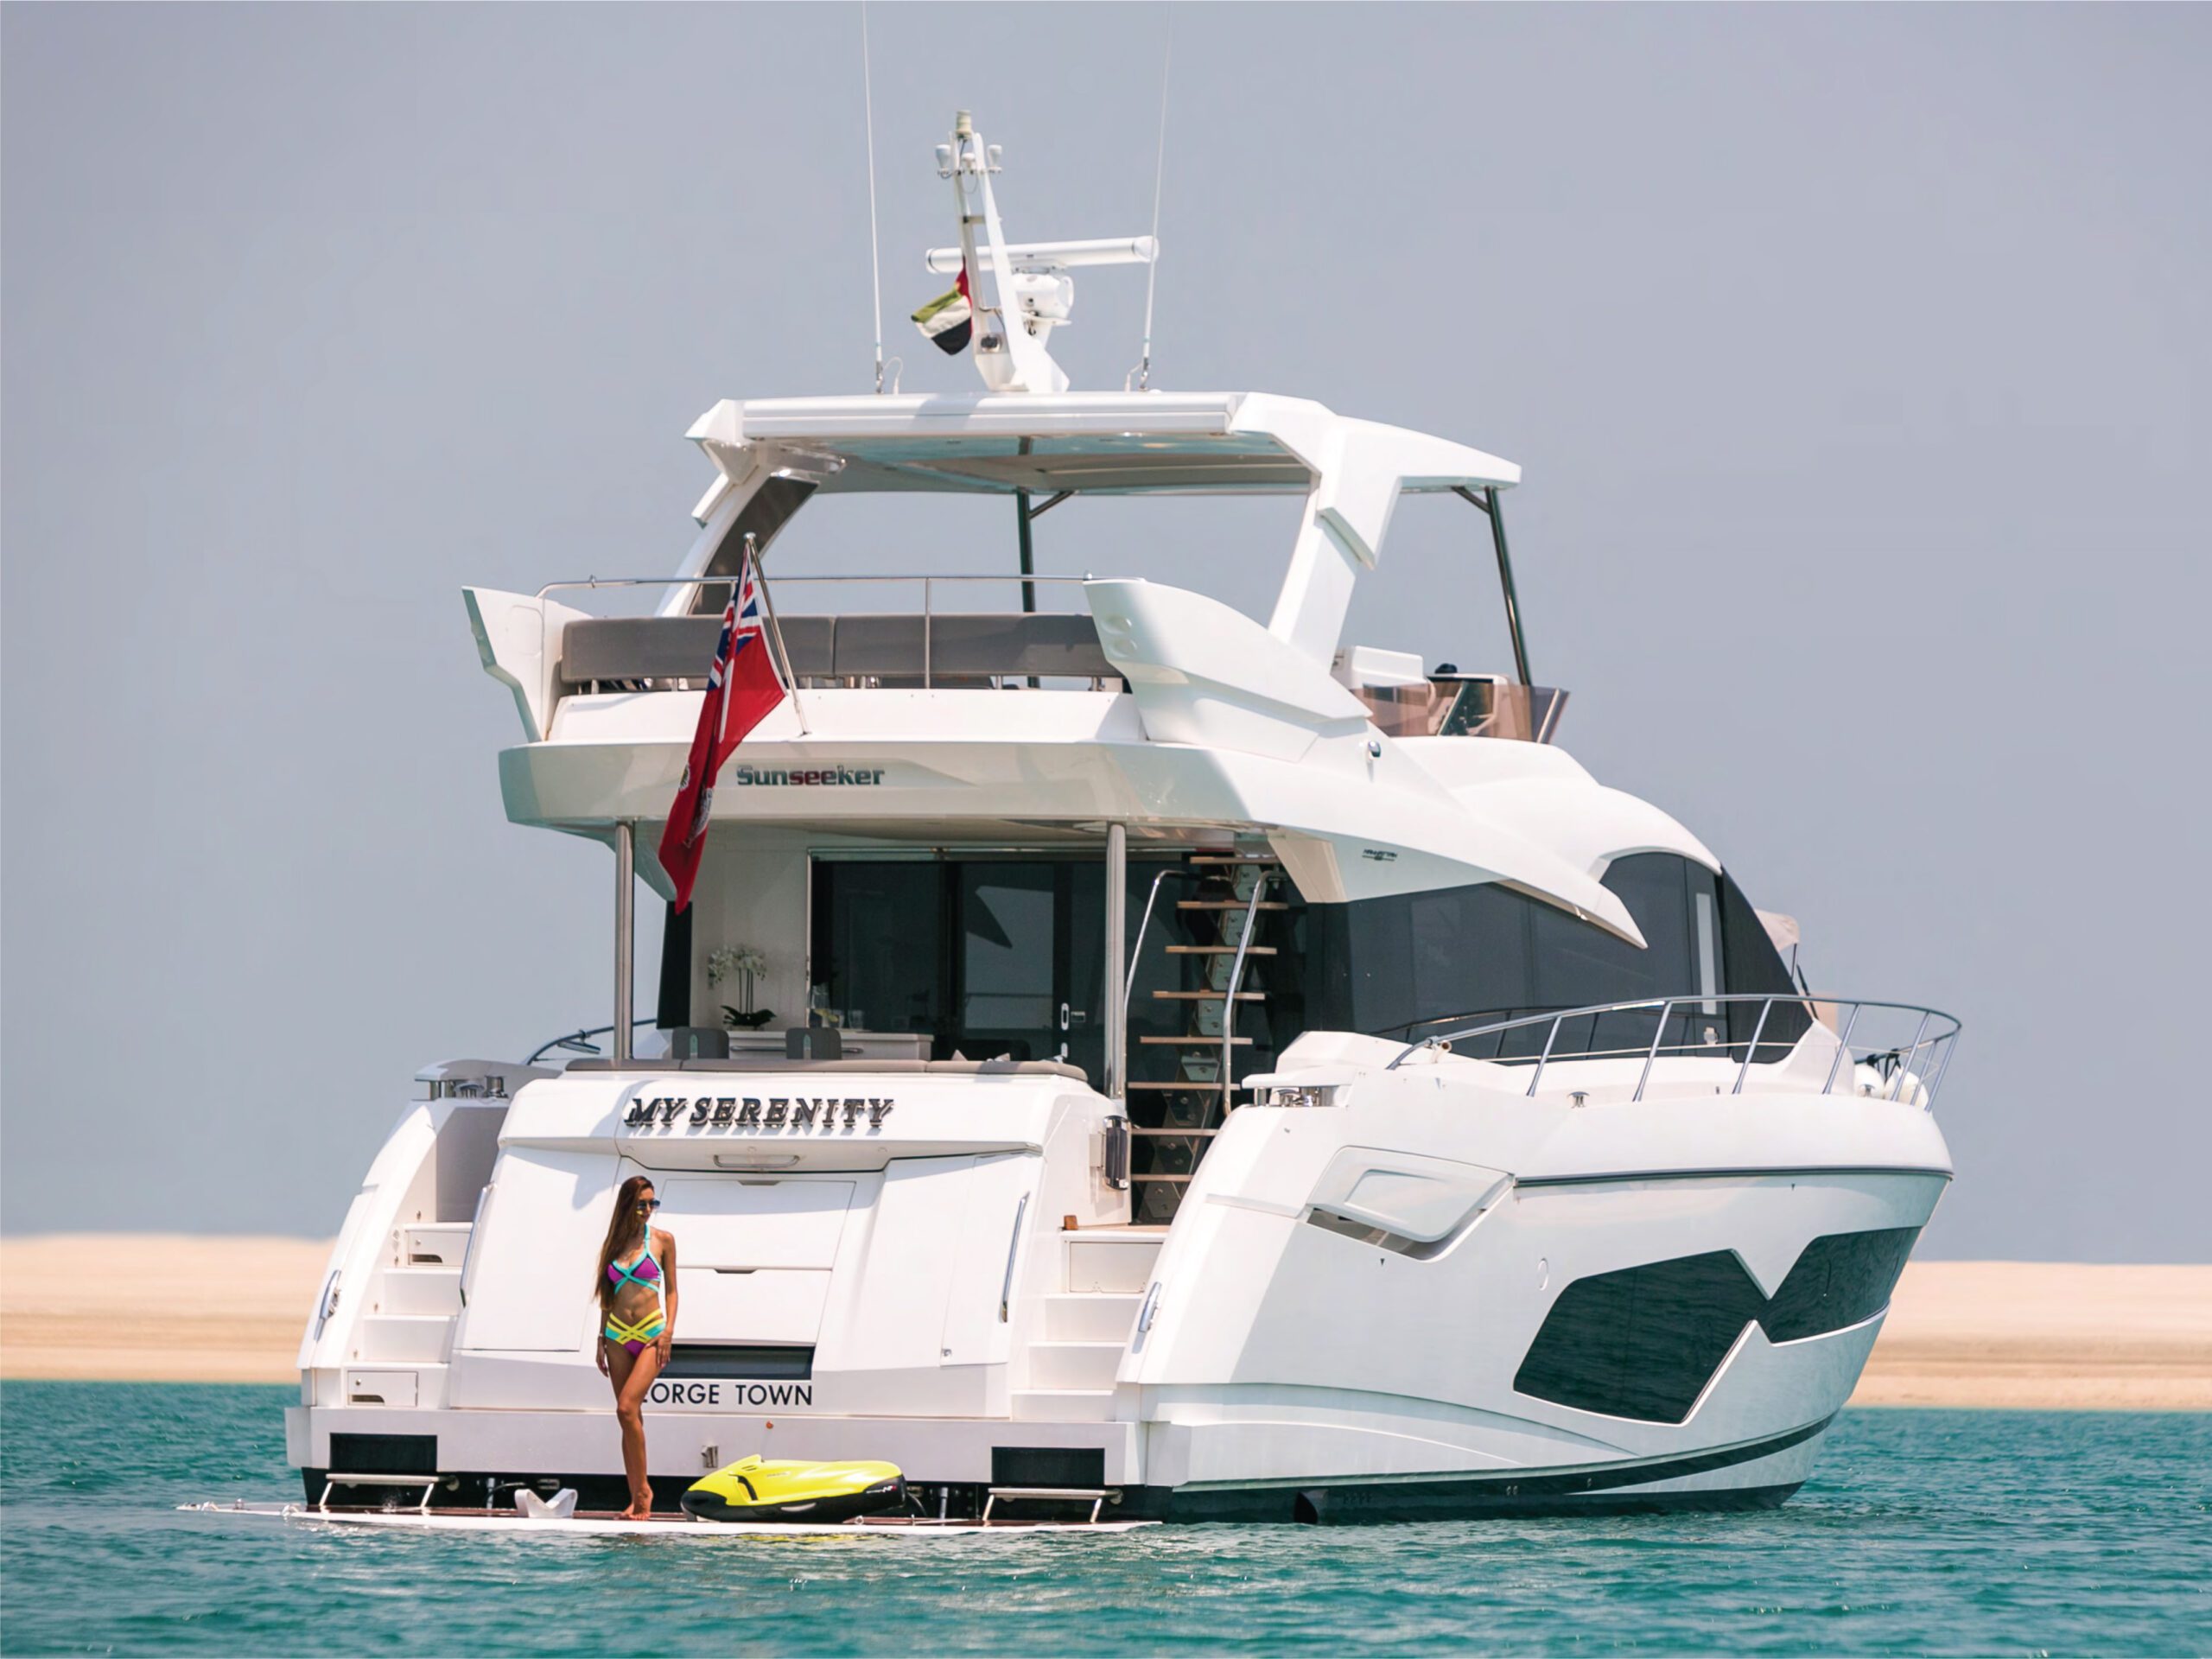 Sunseeker 70 ft. yacht with best price in Dubai